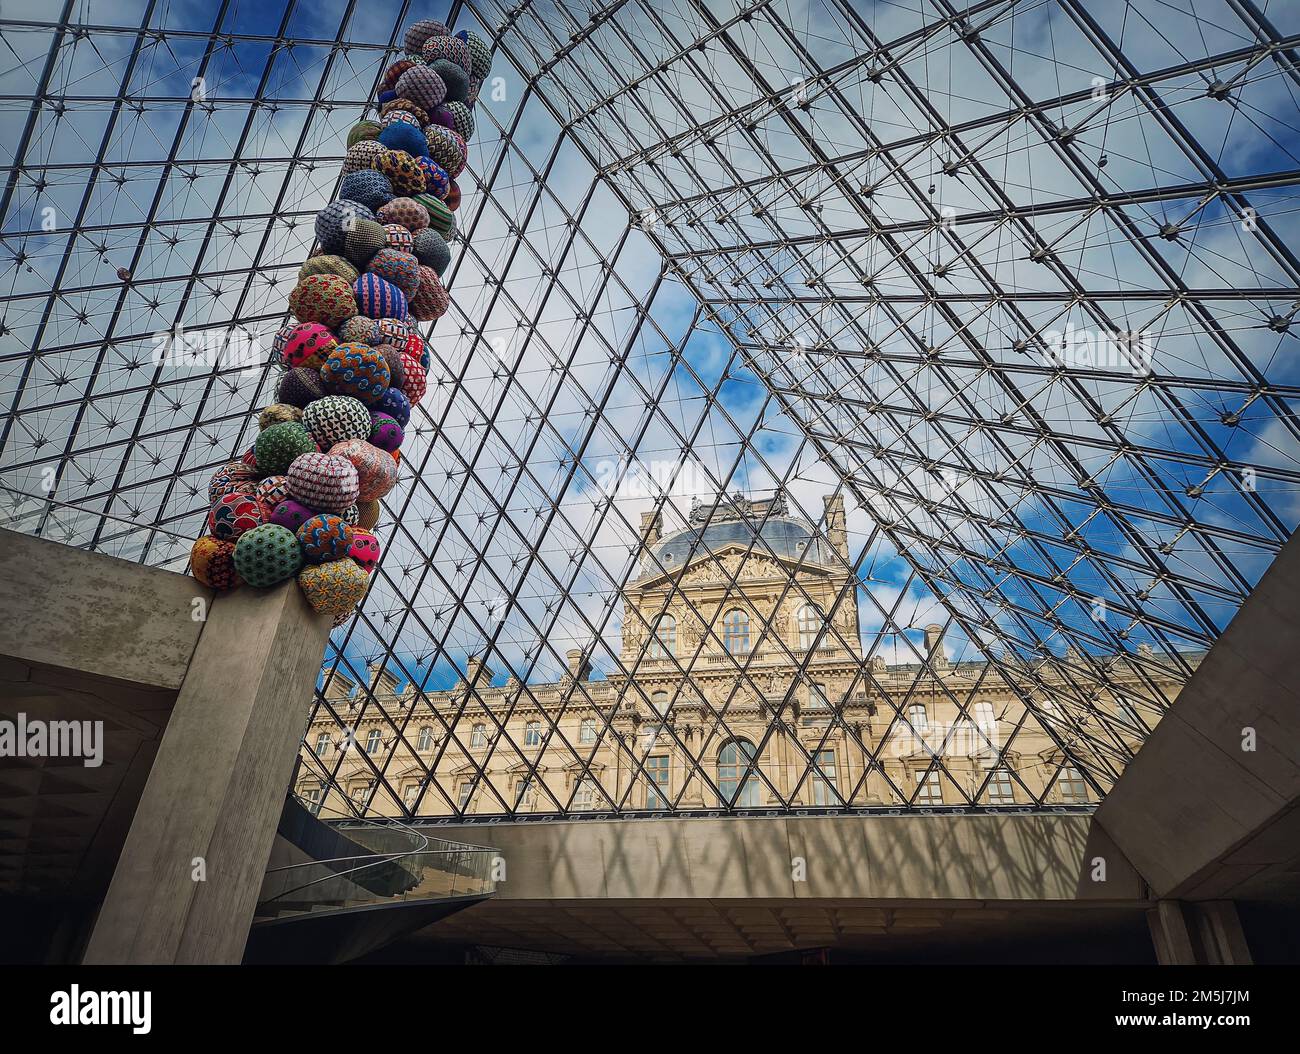 Underneath the Louvre glass pyramid. Beautiful architectural details with an abstract mixture of classical and modern architecture styles Stock Photo